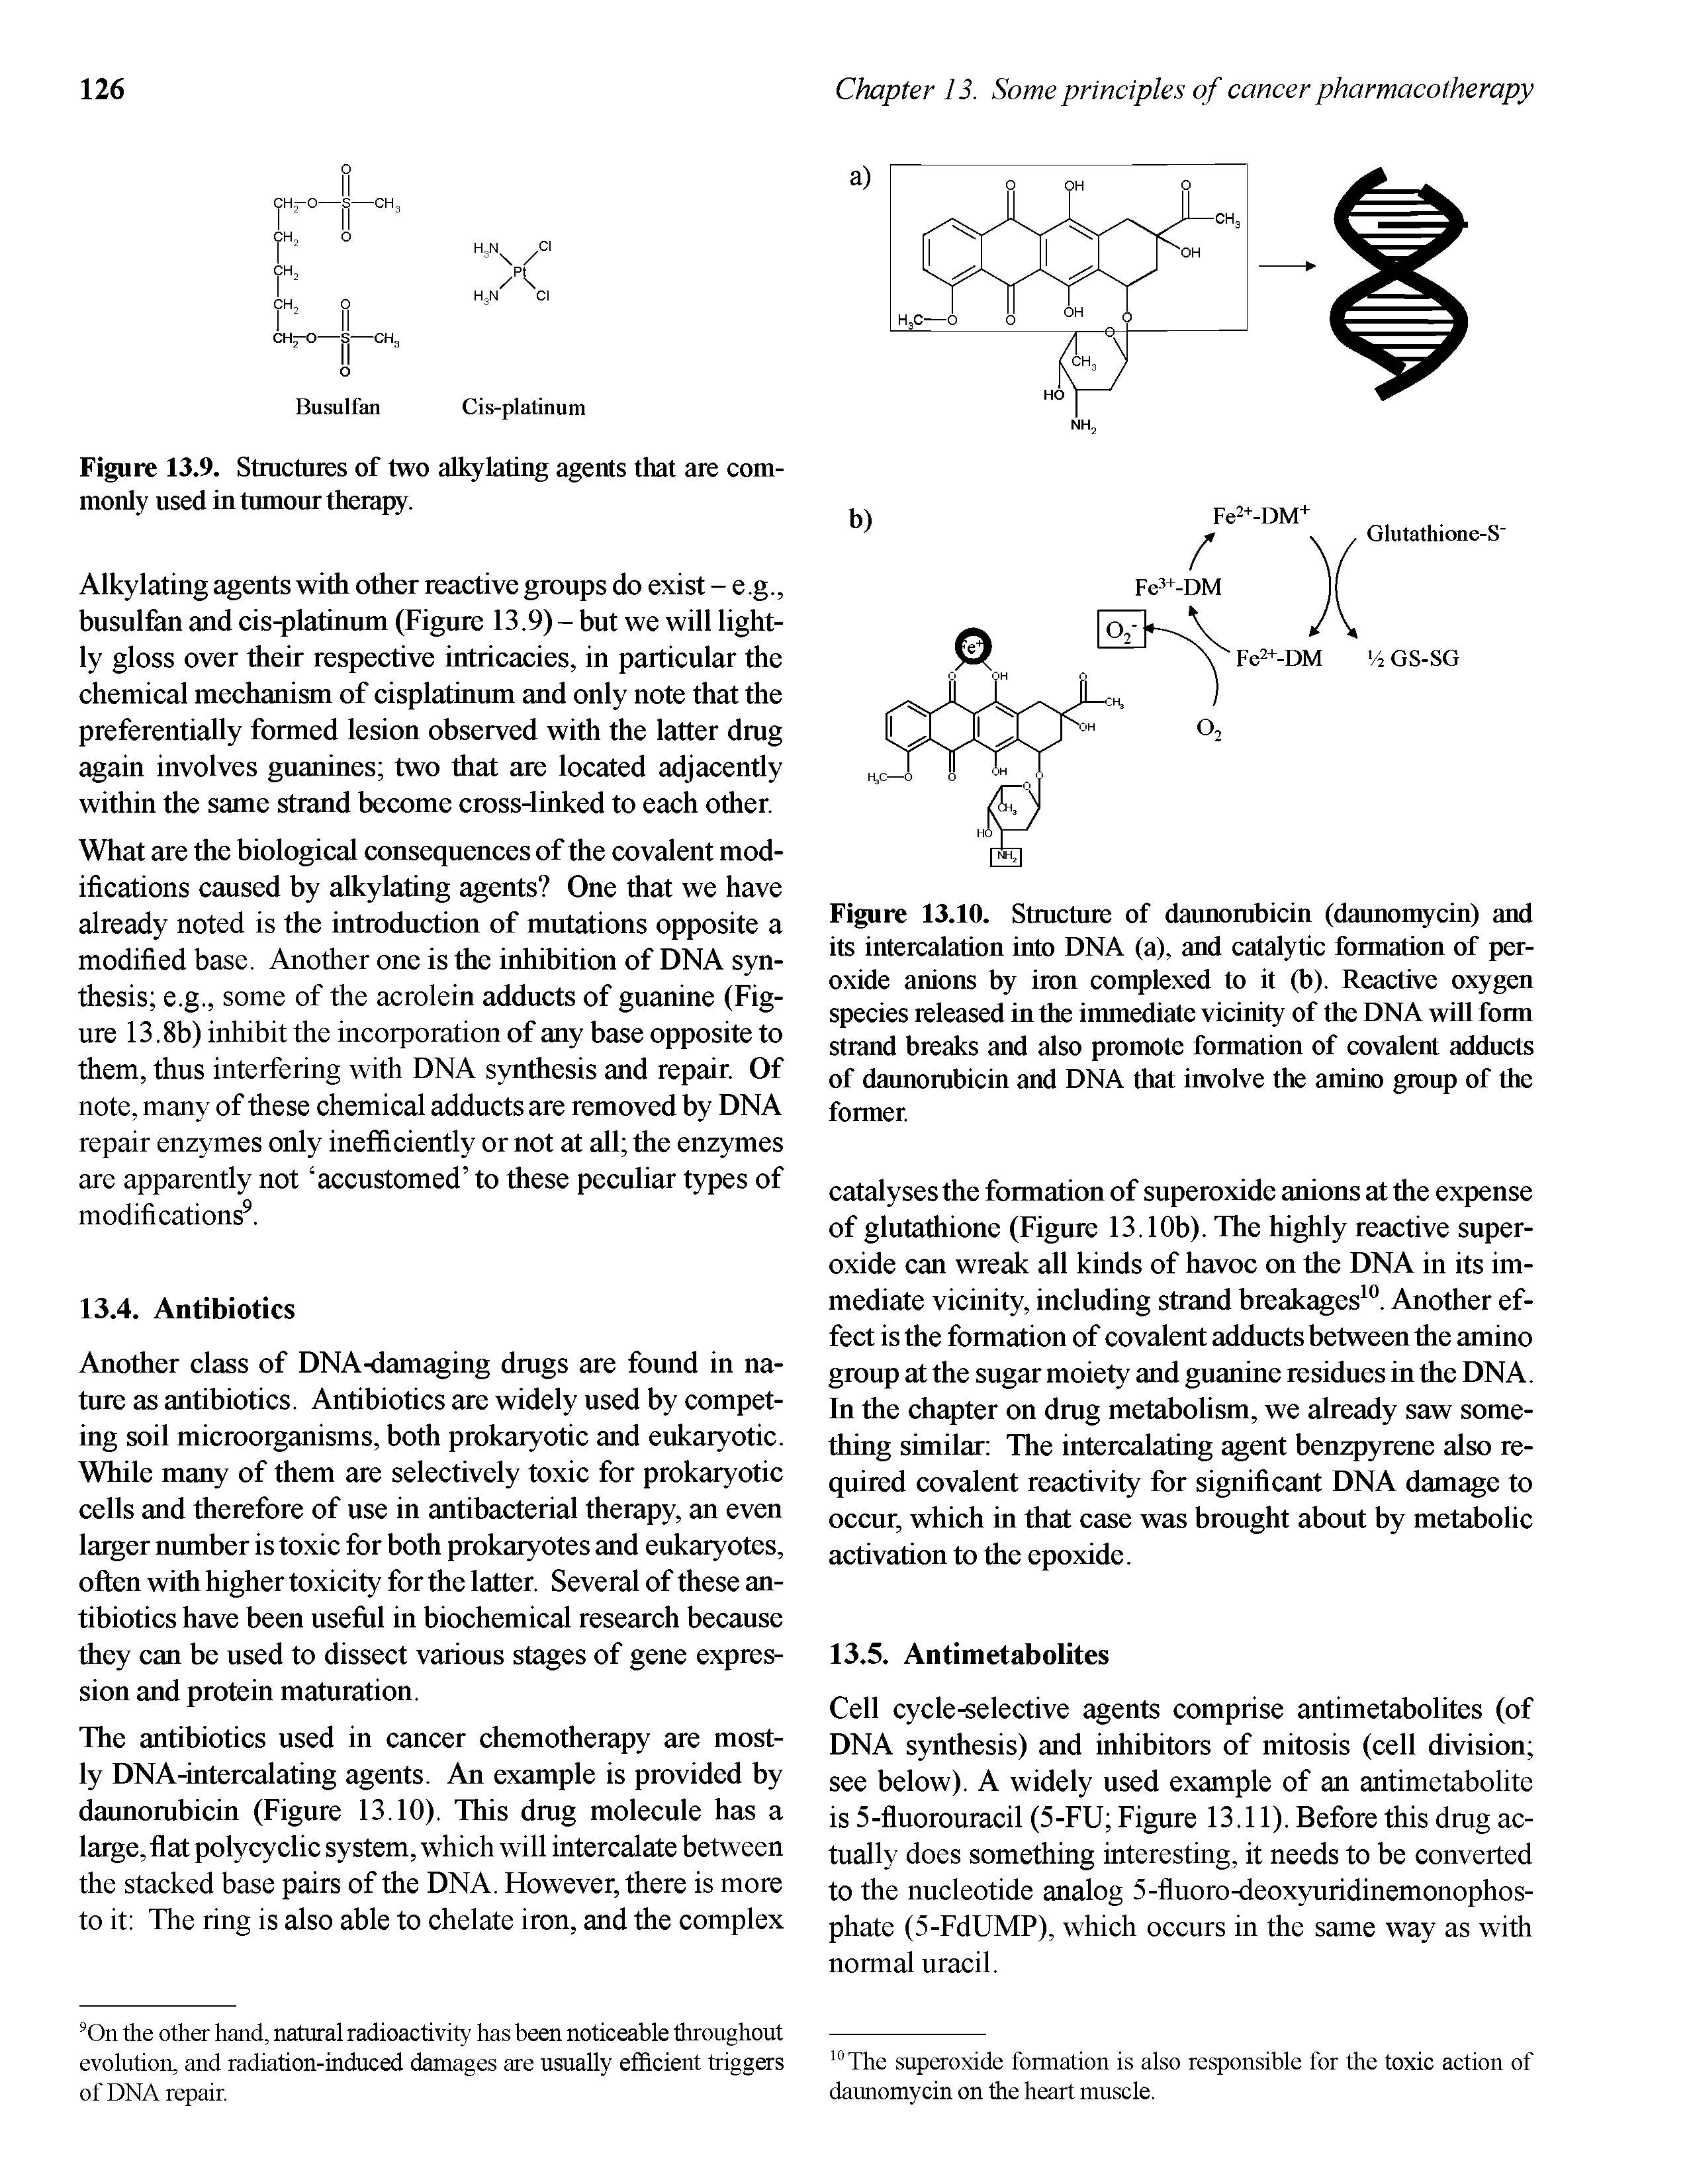 Figure 13.10. Structure of daunorabicin (daunomycin) and its intercalation into DNA (a), and catalytic formation of peroxide anions by iron complexed to it (b). Reactive oxygen species released in the immediate vicinity of the DNA will form strand breaks and also promote formation of covalent adducts of daimorabicin and DNA that involve the amino group of the former.